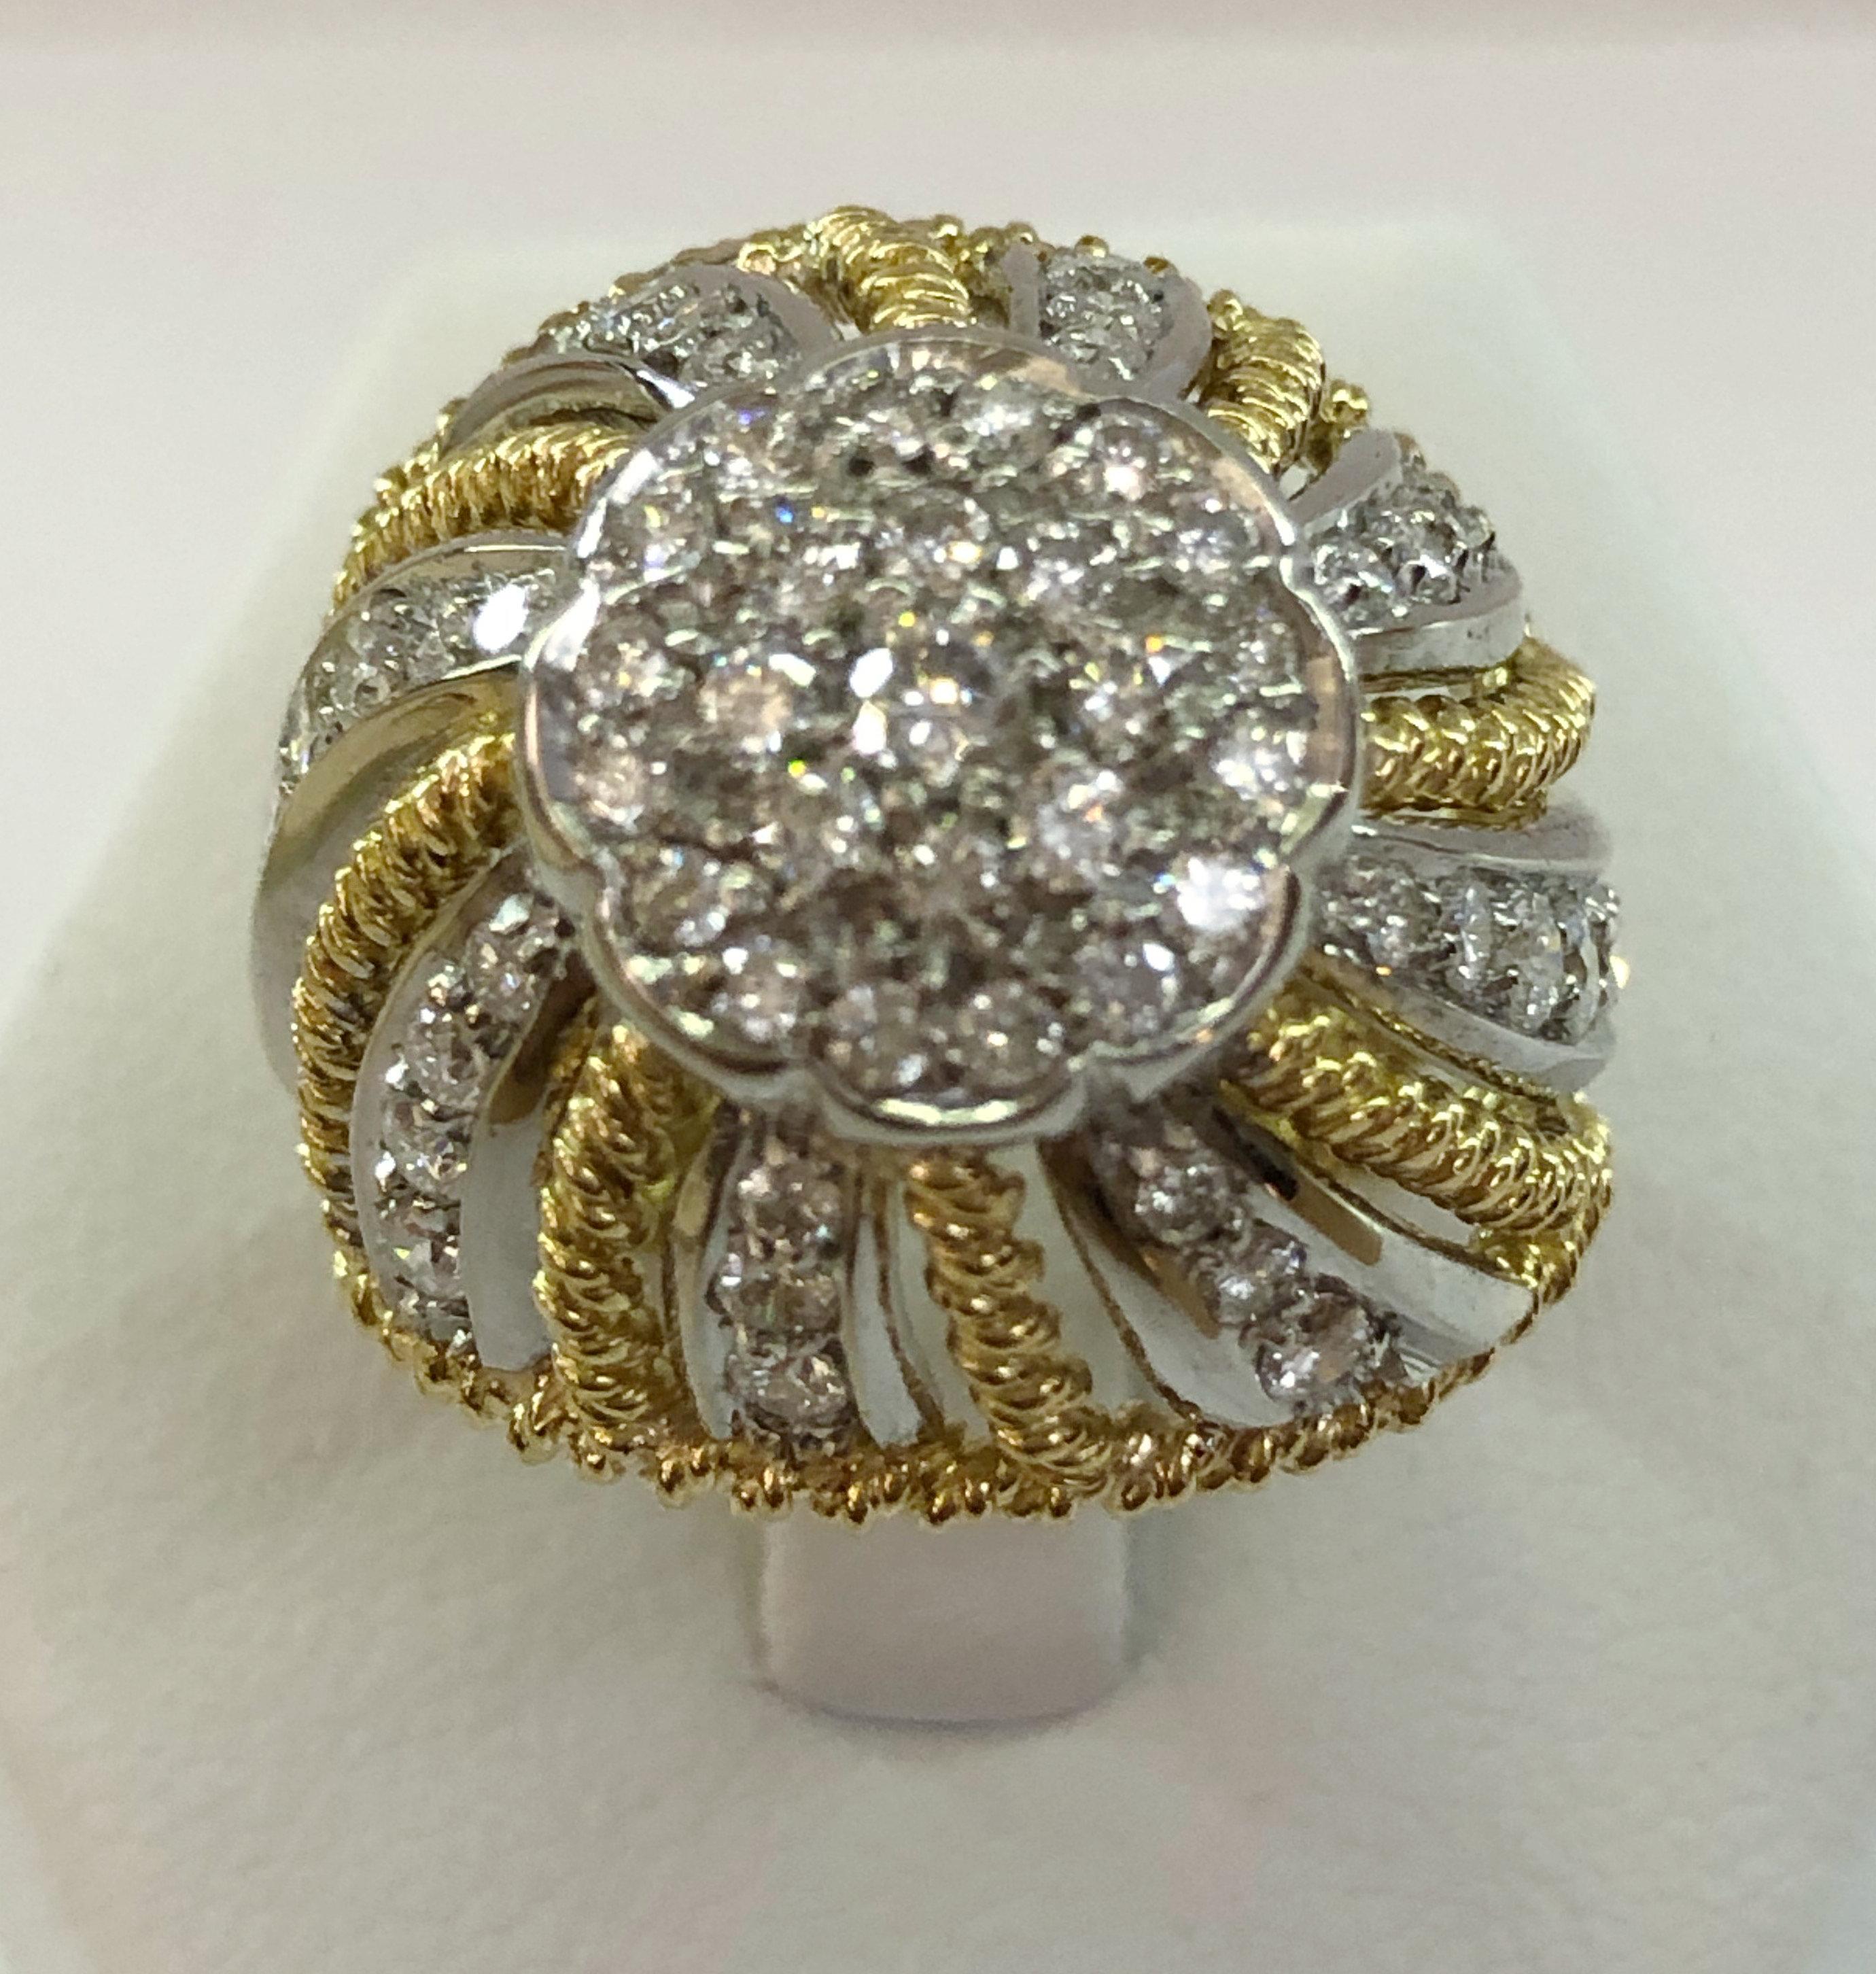 18 karat white gold dome ring with brilliant diamonds for a total of 2.5 karats and twisted wire, Italy 1950-1960s
Ring size US 6.5